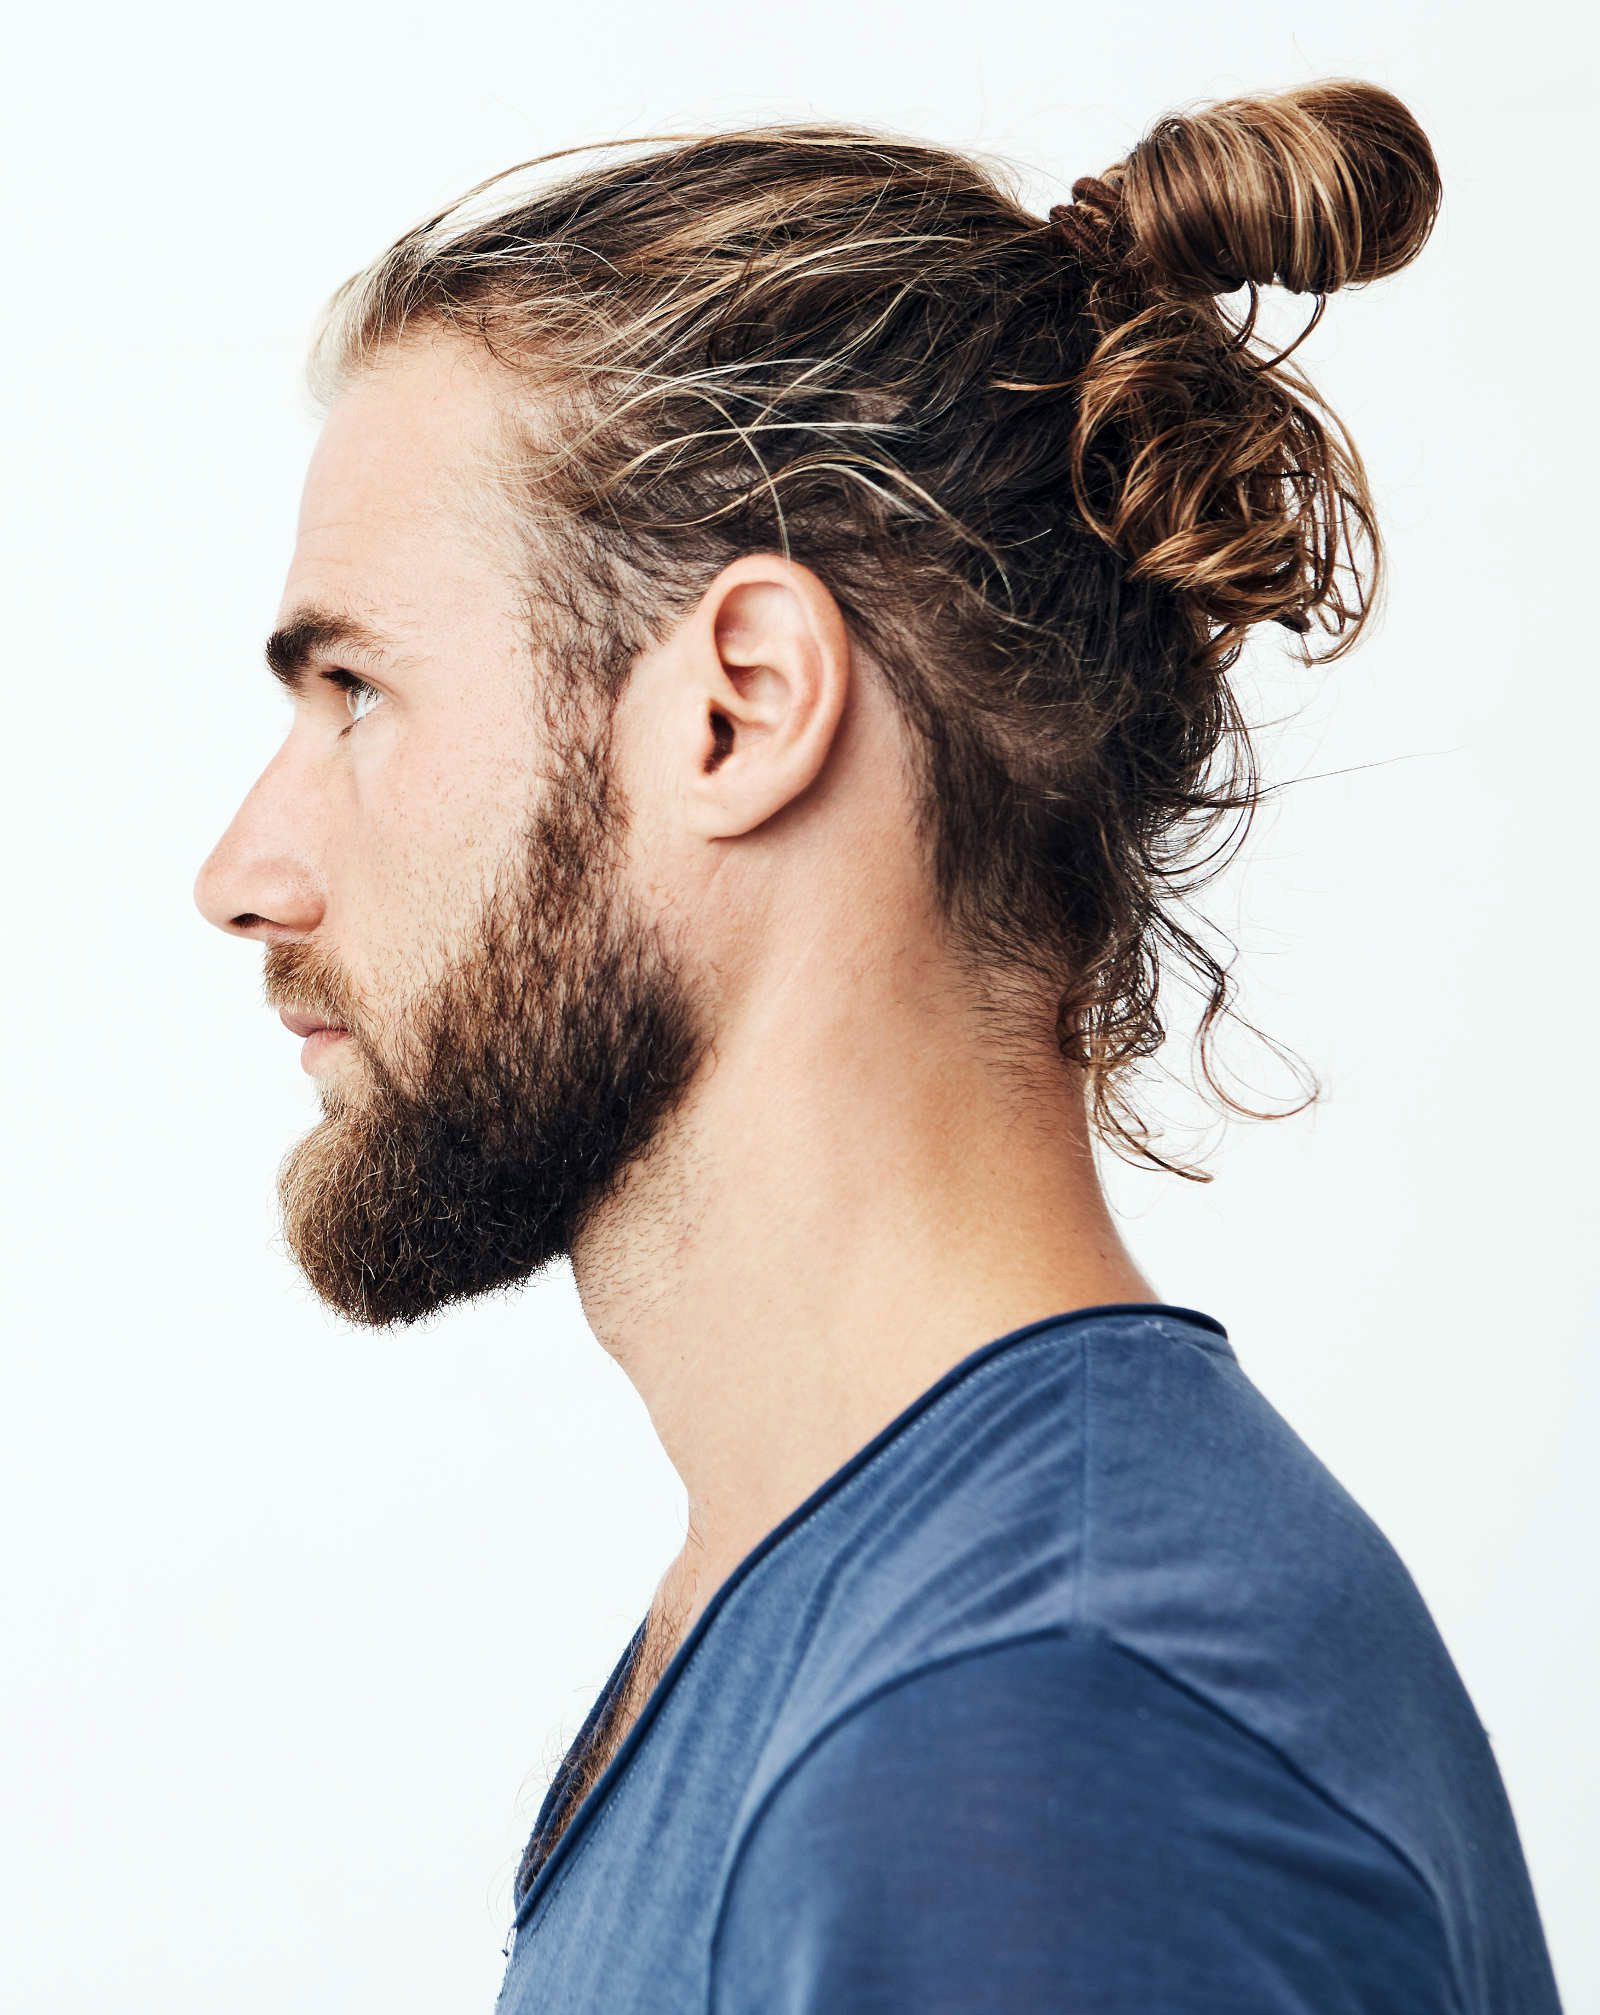 40 Types of Man Bun Hairstyles | Gallery + How To | Haircut Inspiration